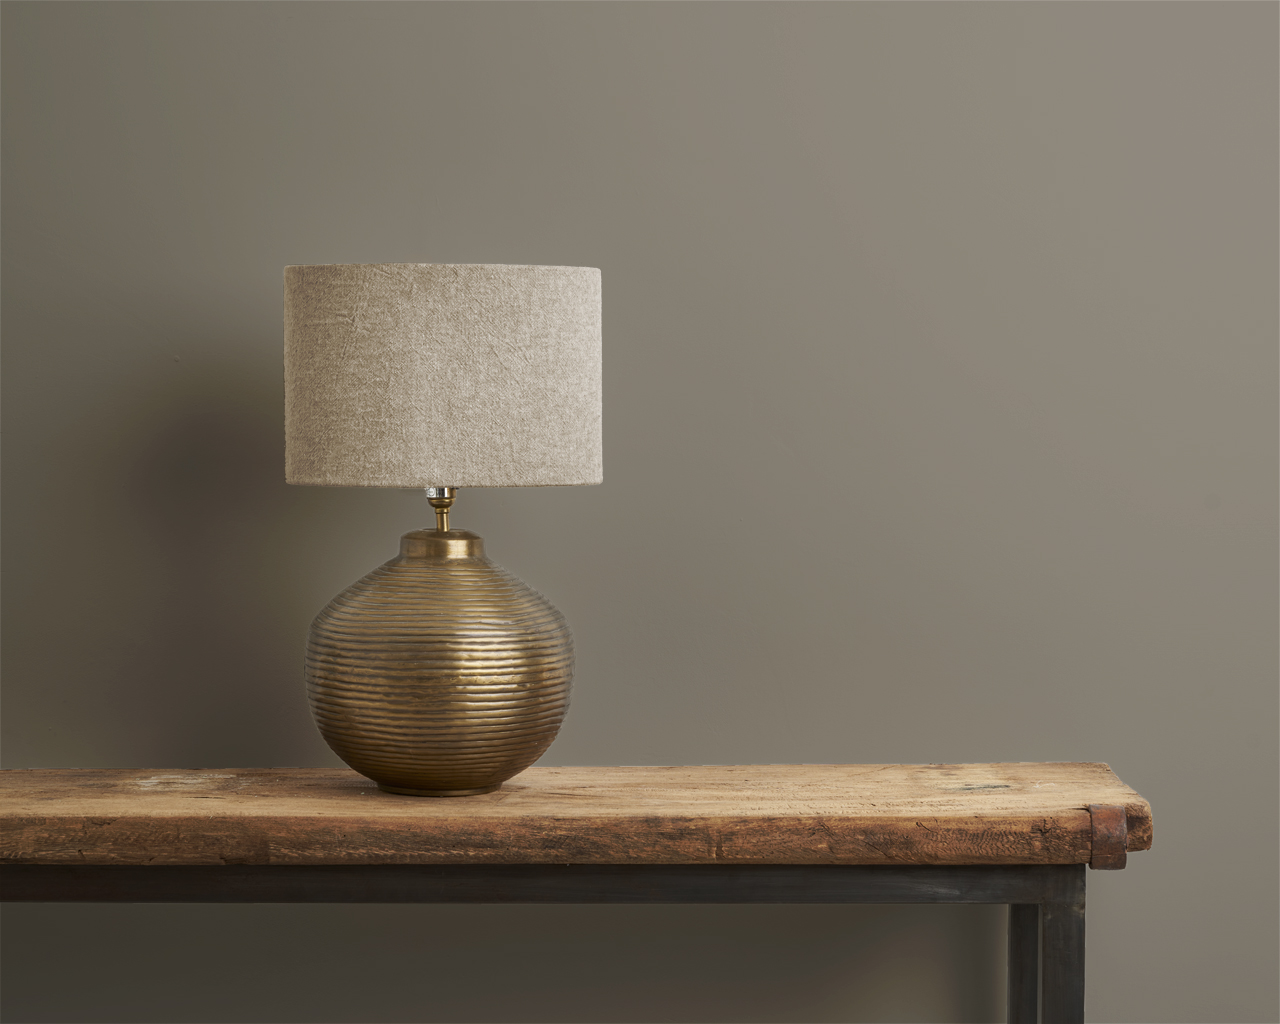 Annie Sloan French Linen Wall Paint with Brass Lamp